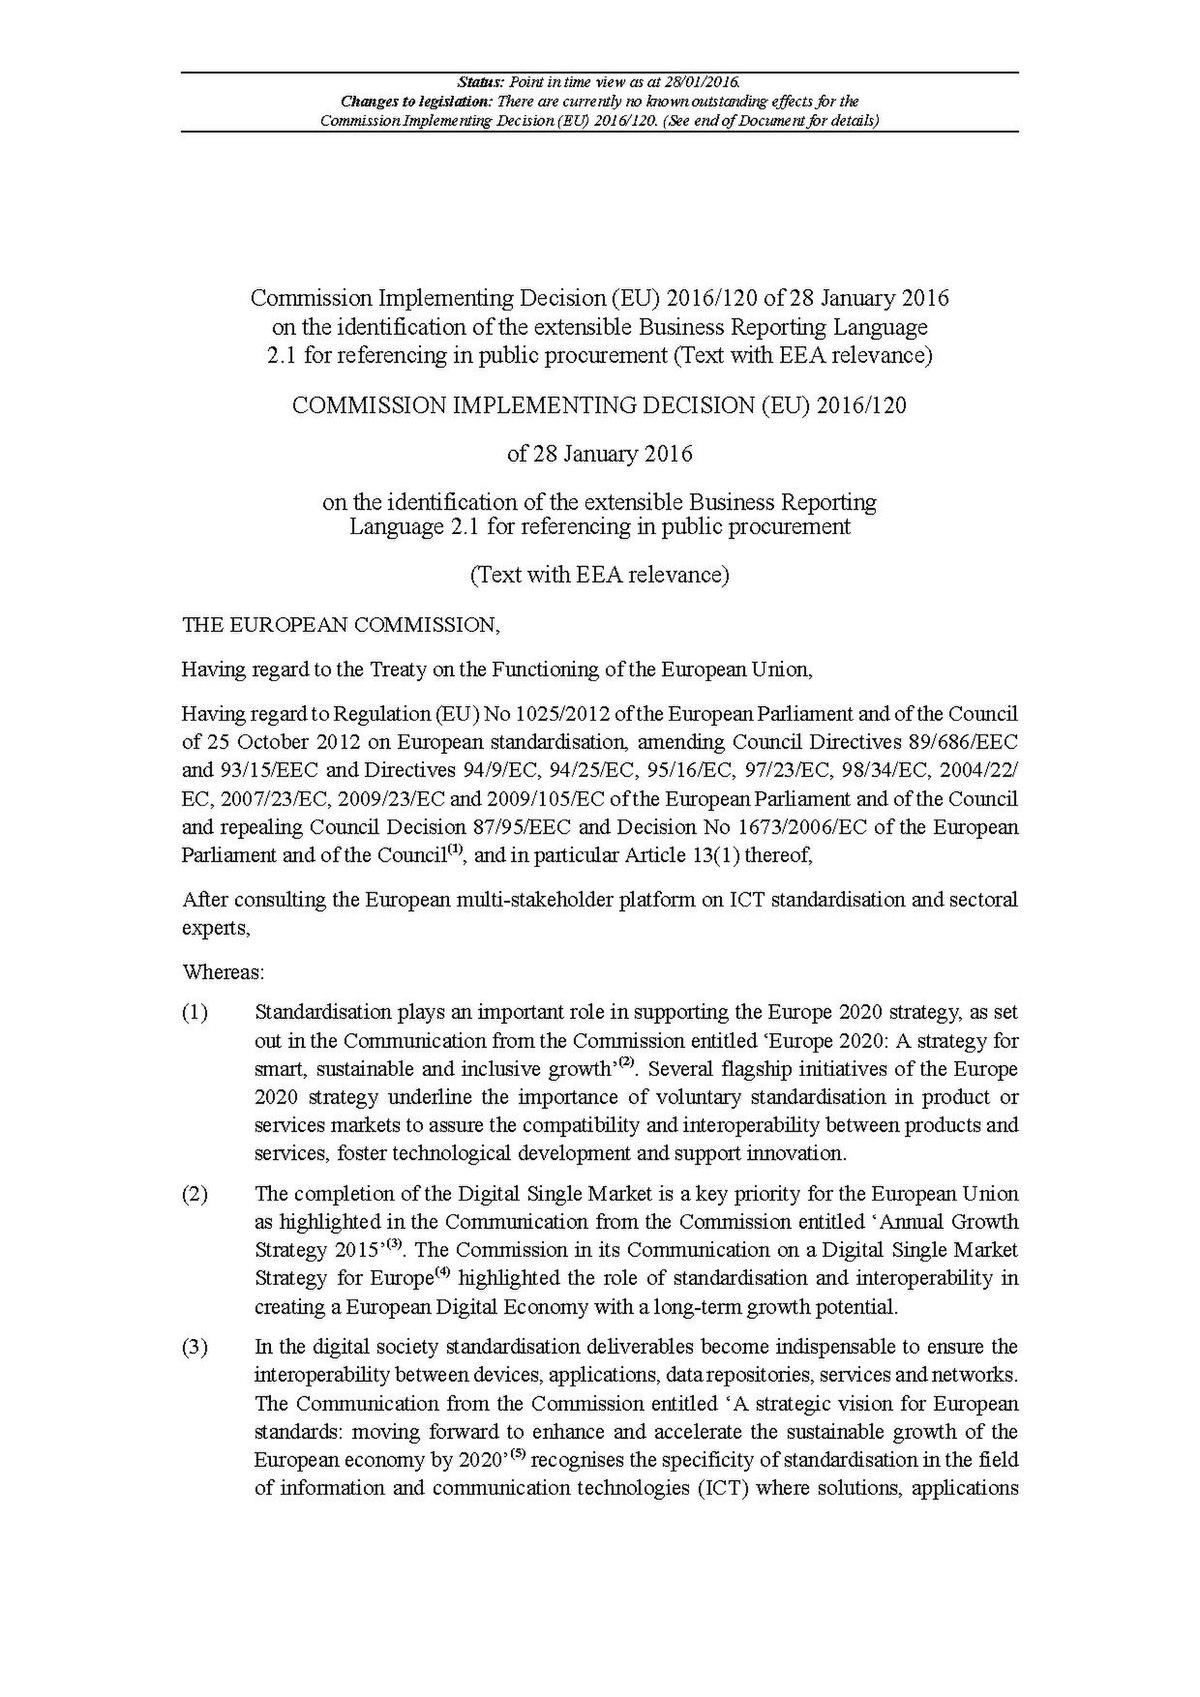 File:Commission Implementing Decision (EU) 2016-120 of 28 January ...